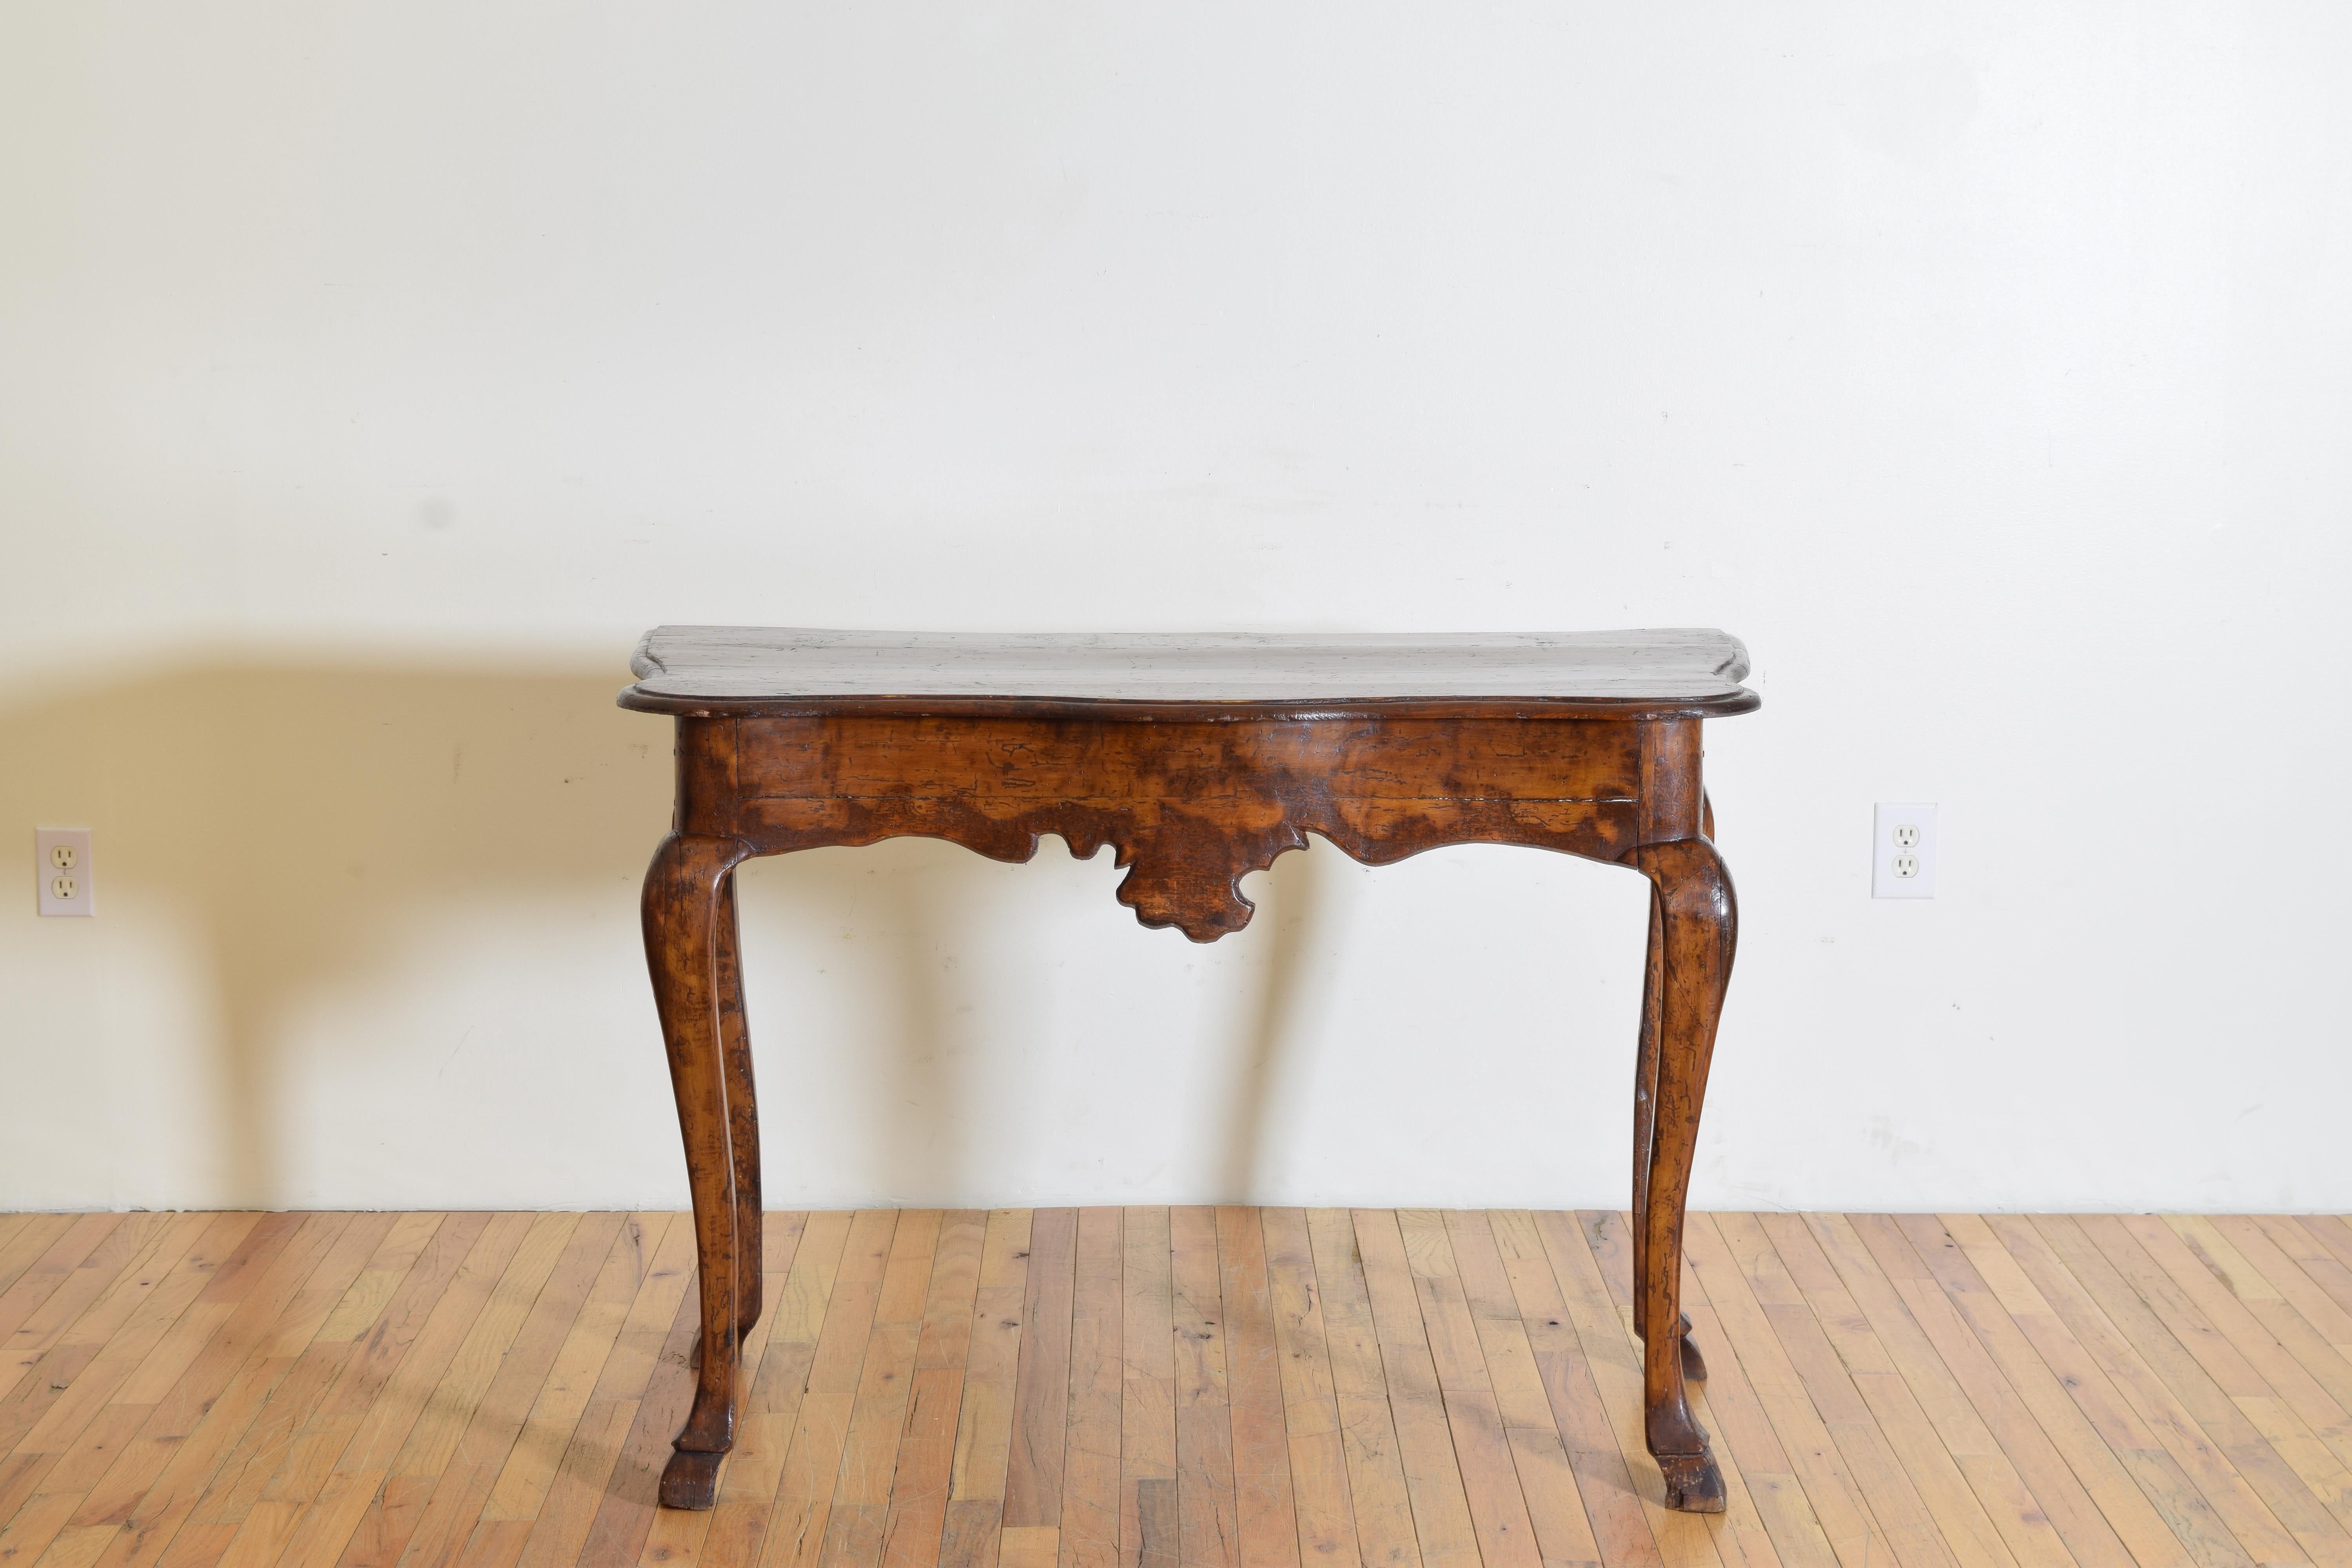 Rococo Italian, Tuscan, Louis XIV Shaped Walnut & Fir Wood Console Table, mid 18th c For Sale